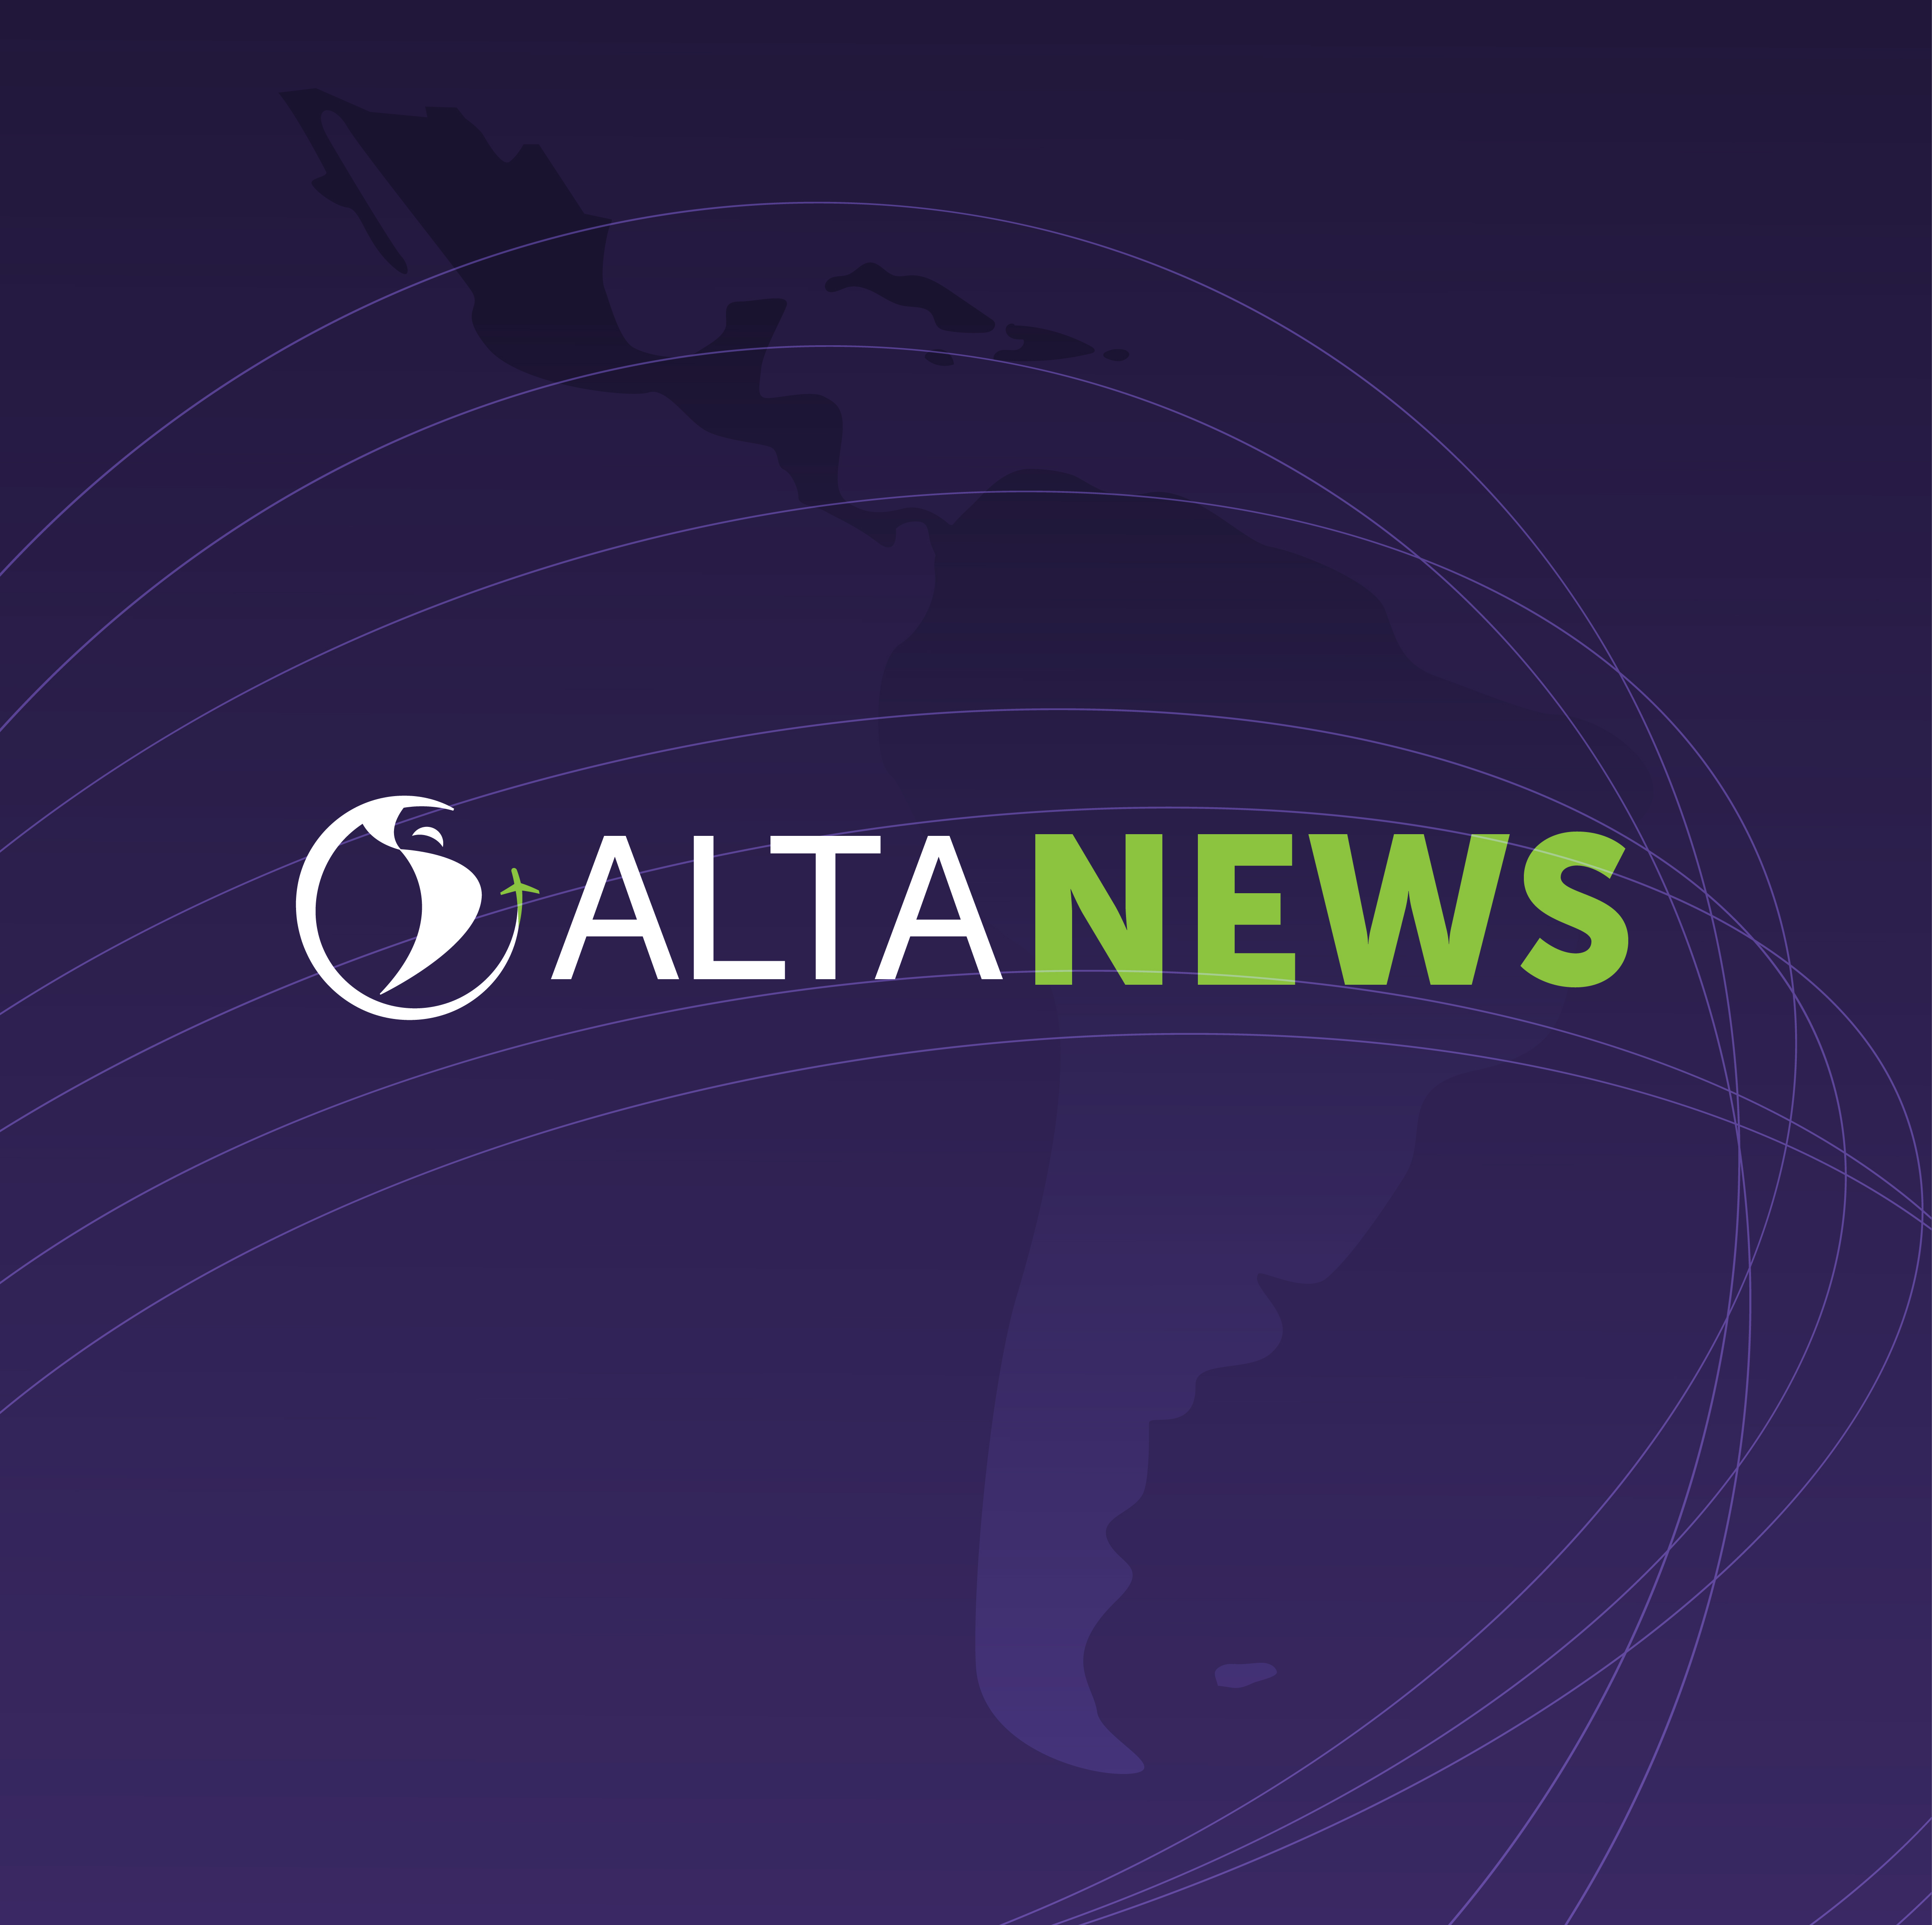 ALTA NEWS - Amazing January: Air Traffic in Latin America and the Caribbean grew by 7.6%